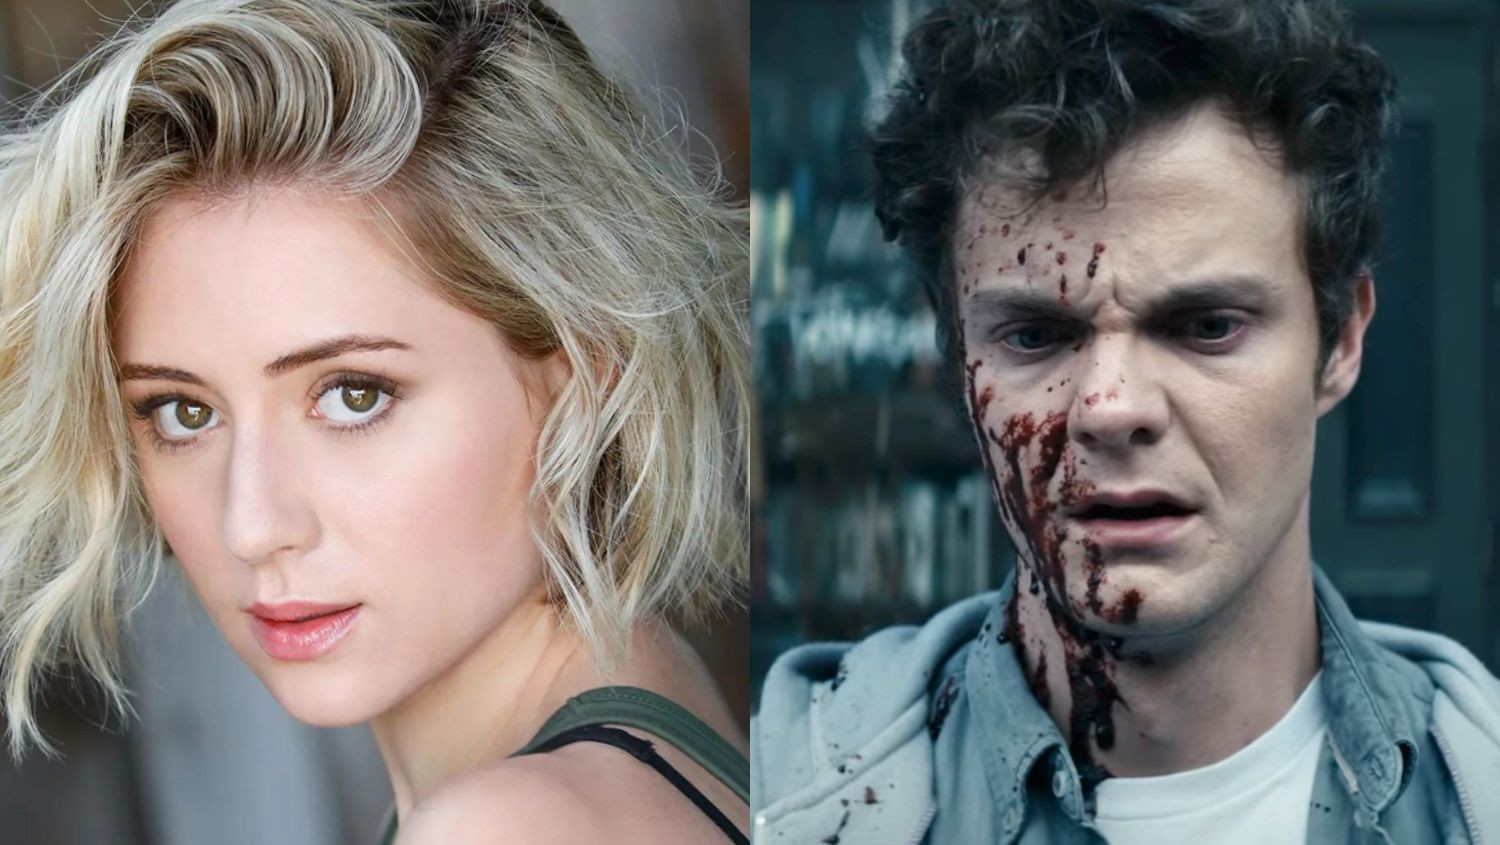 Gen V star Lizze Broadway asked The Boys actor Jack Quaid's tips for fake blood removal